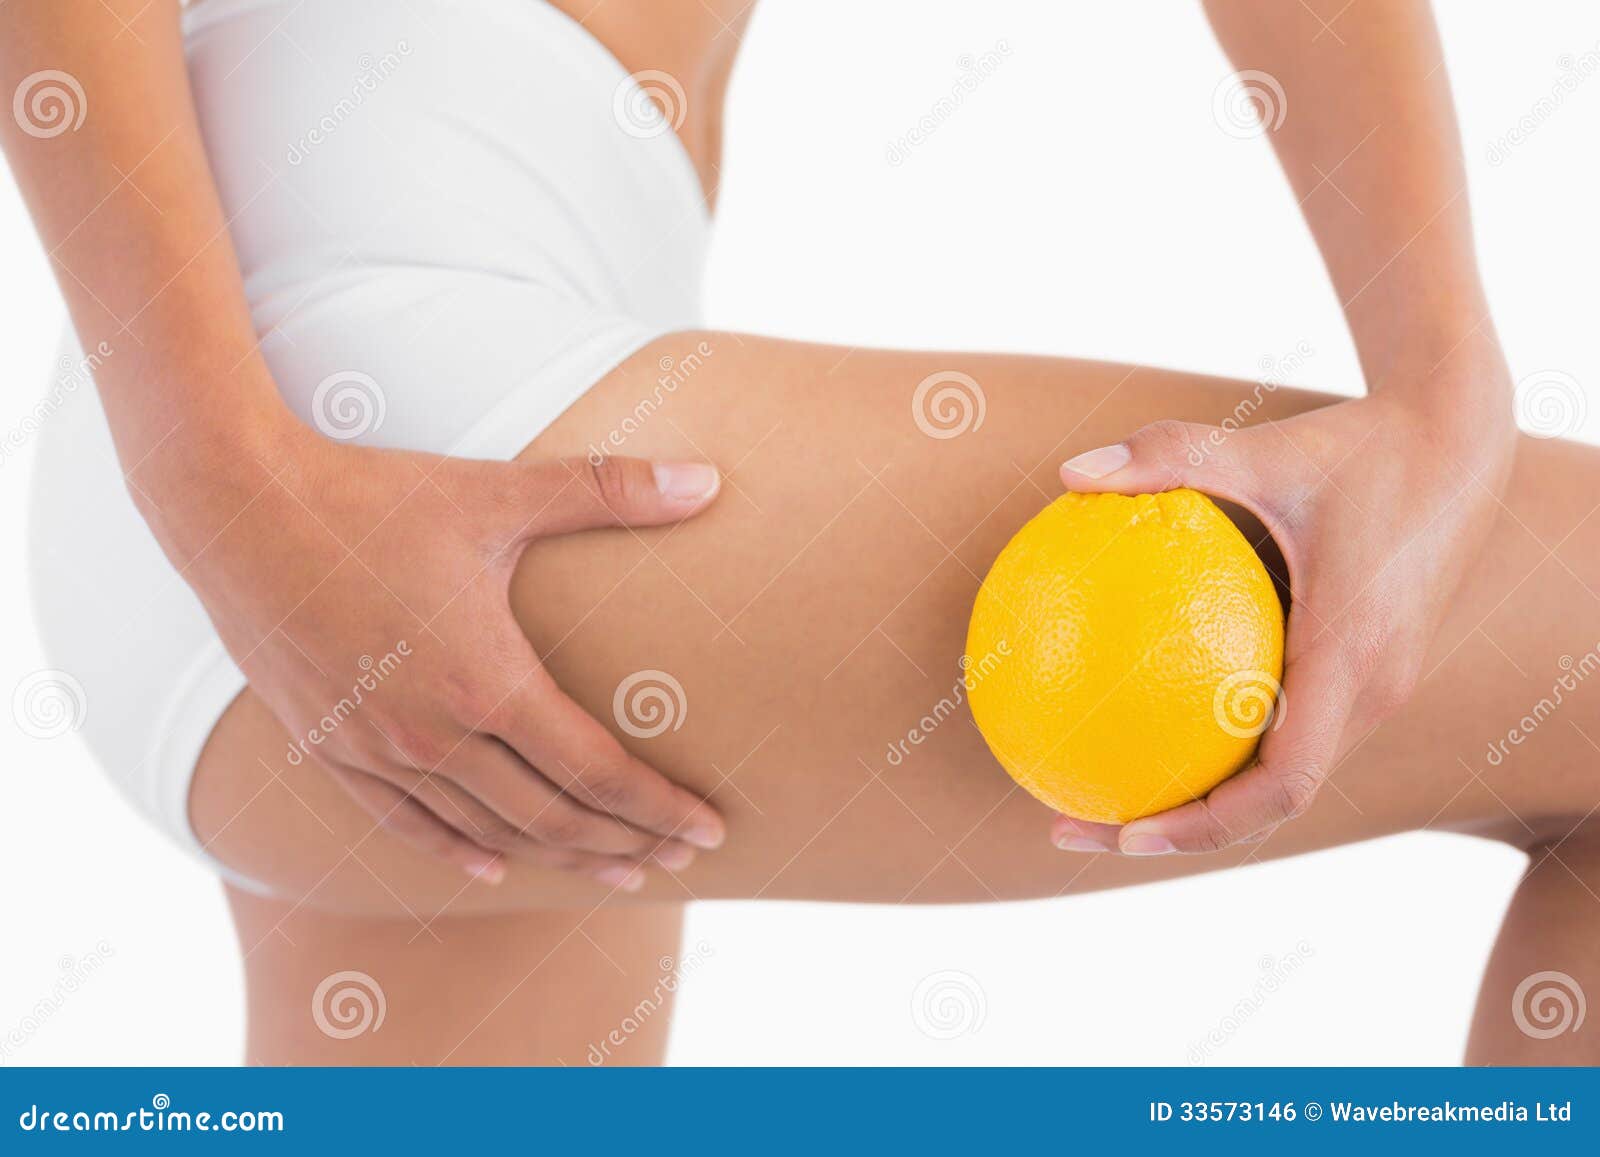 slim-woman-squeezing-cellulite-skin-thigh-as-holds-orange-white-background-33573146.jpg